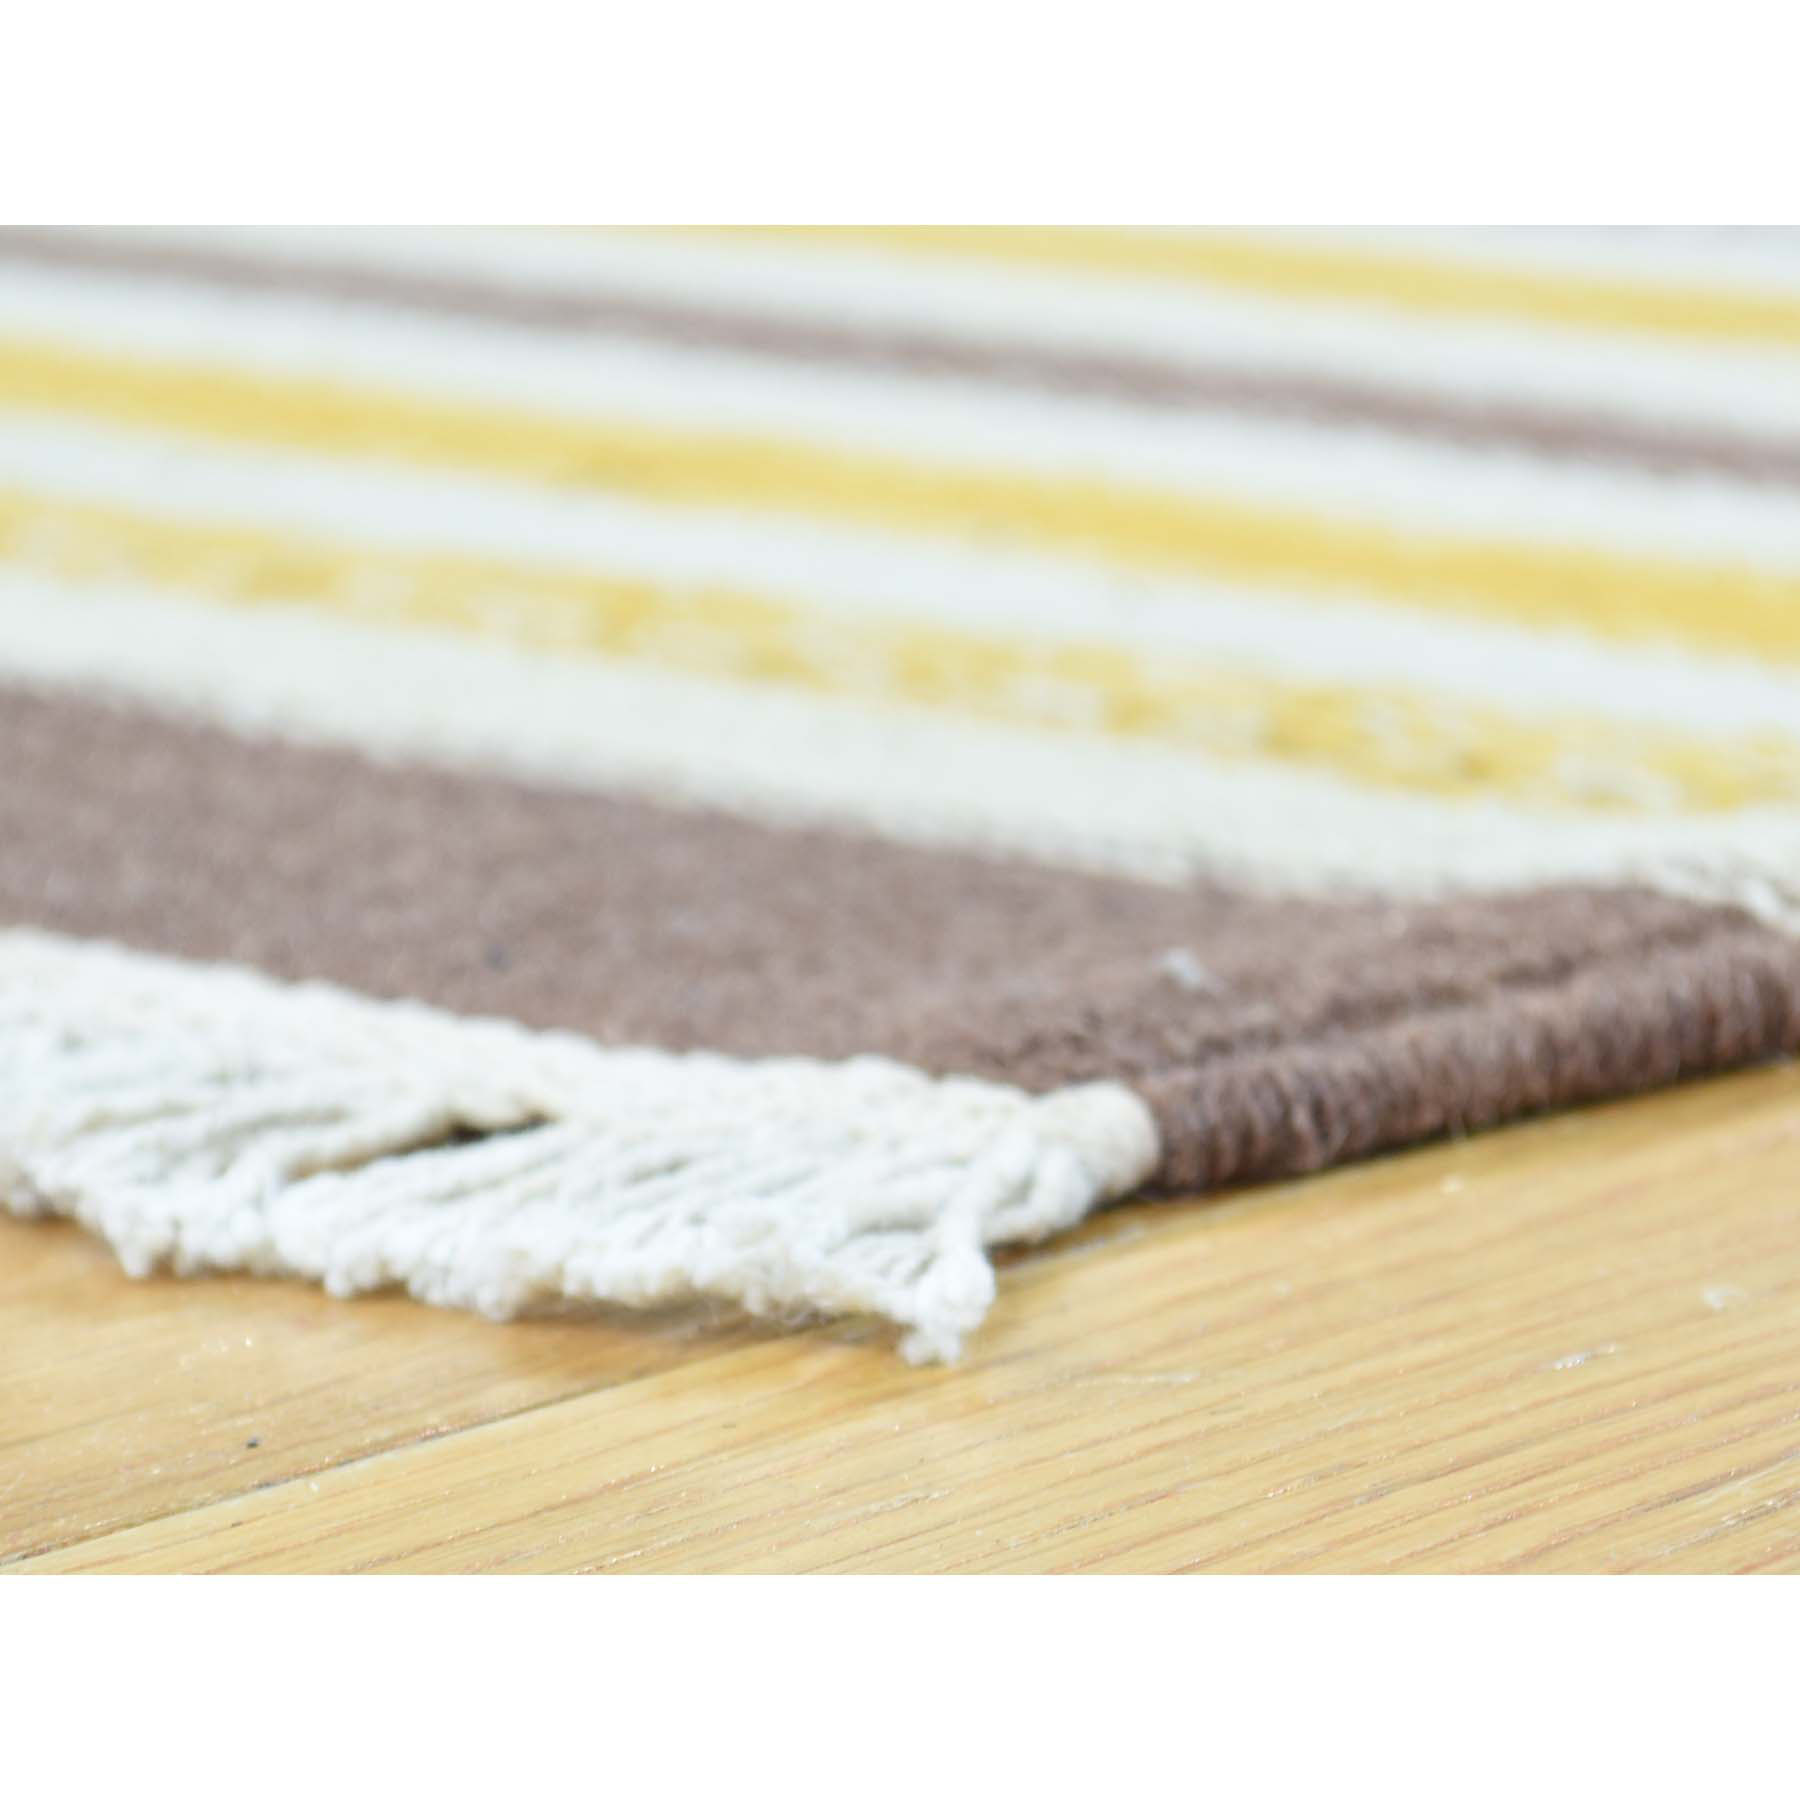 2-5 x8- Hand-Woven Pure Wool Flat Weave Striped Durie Kilim Runner Rug 